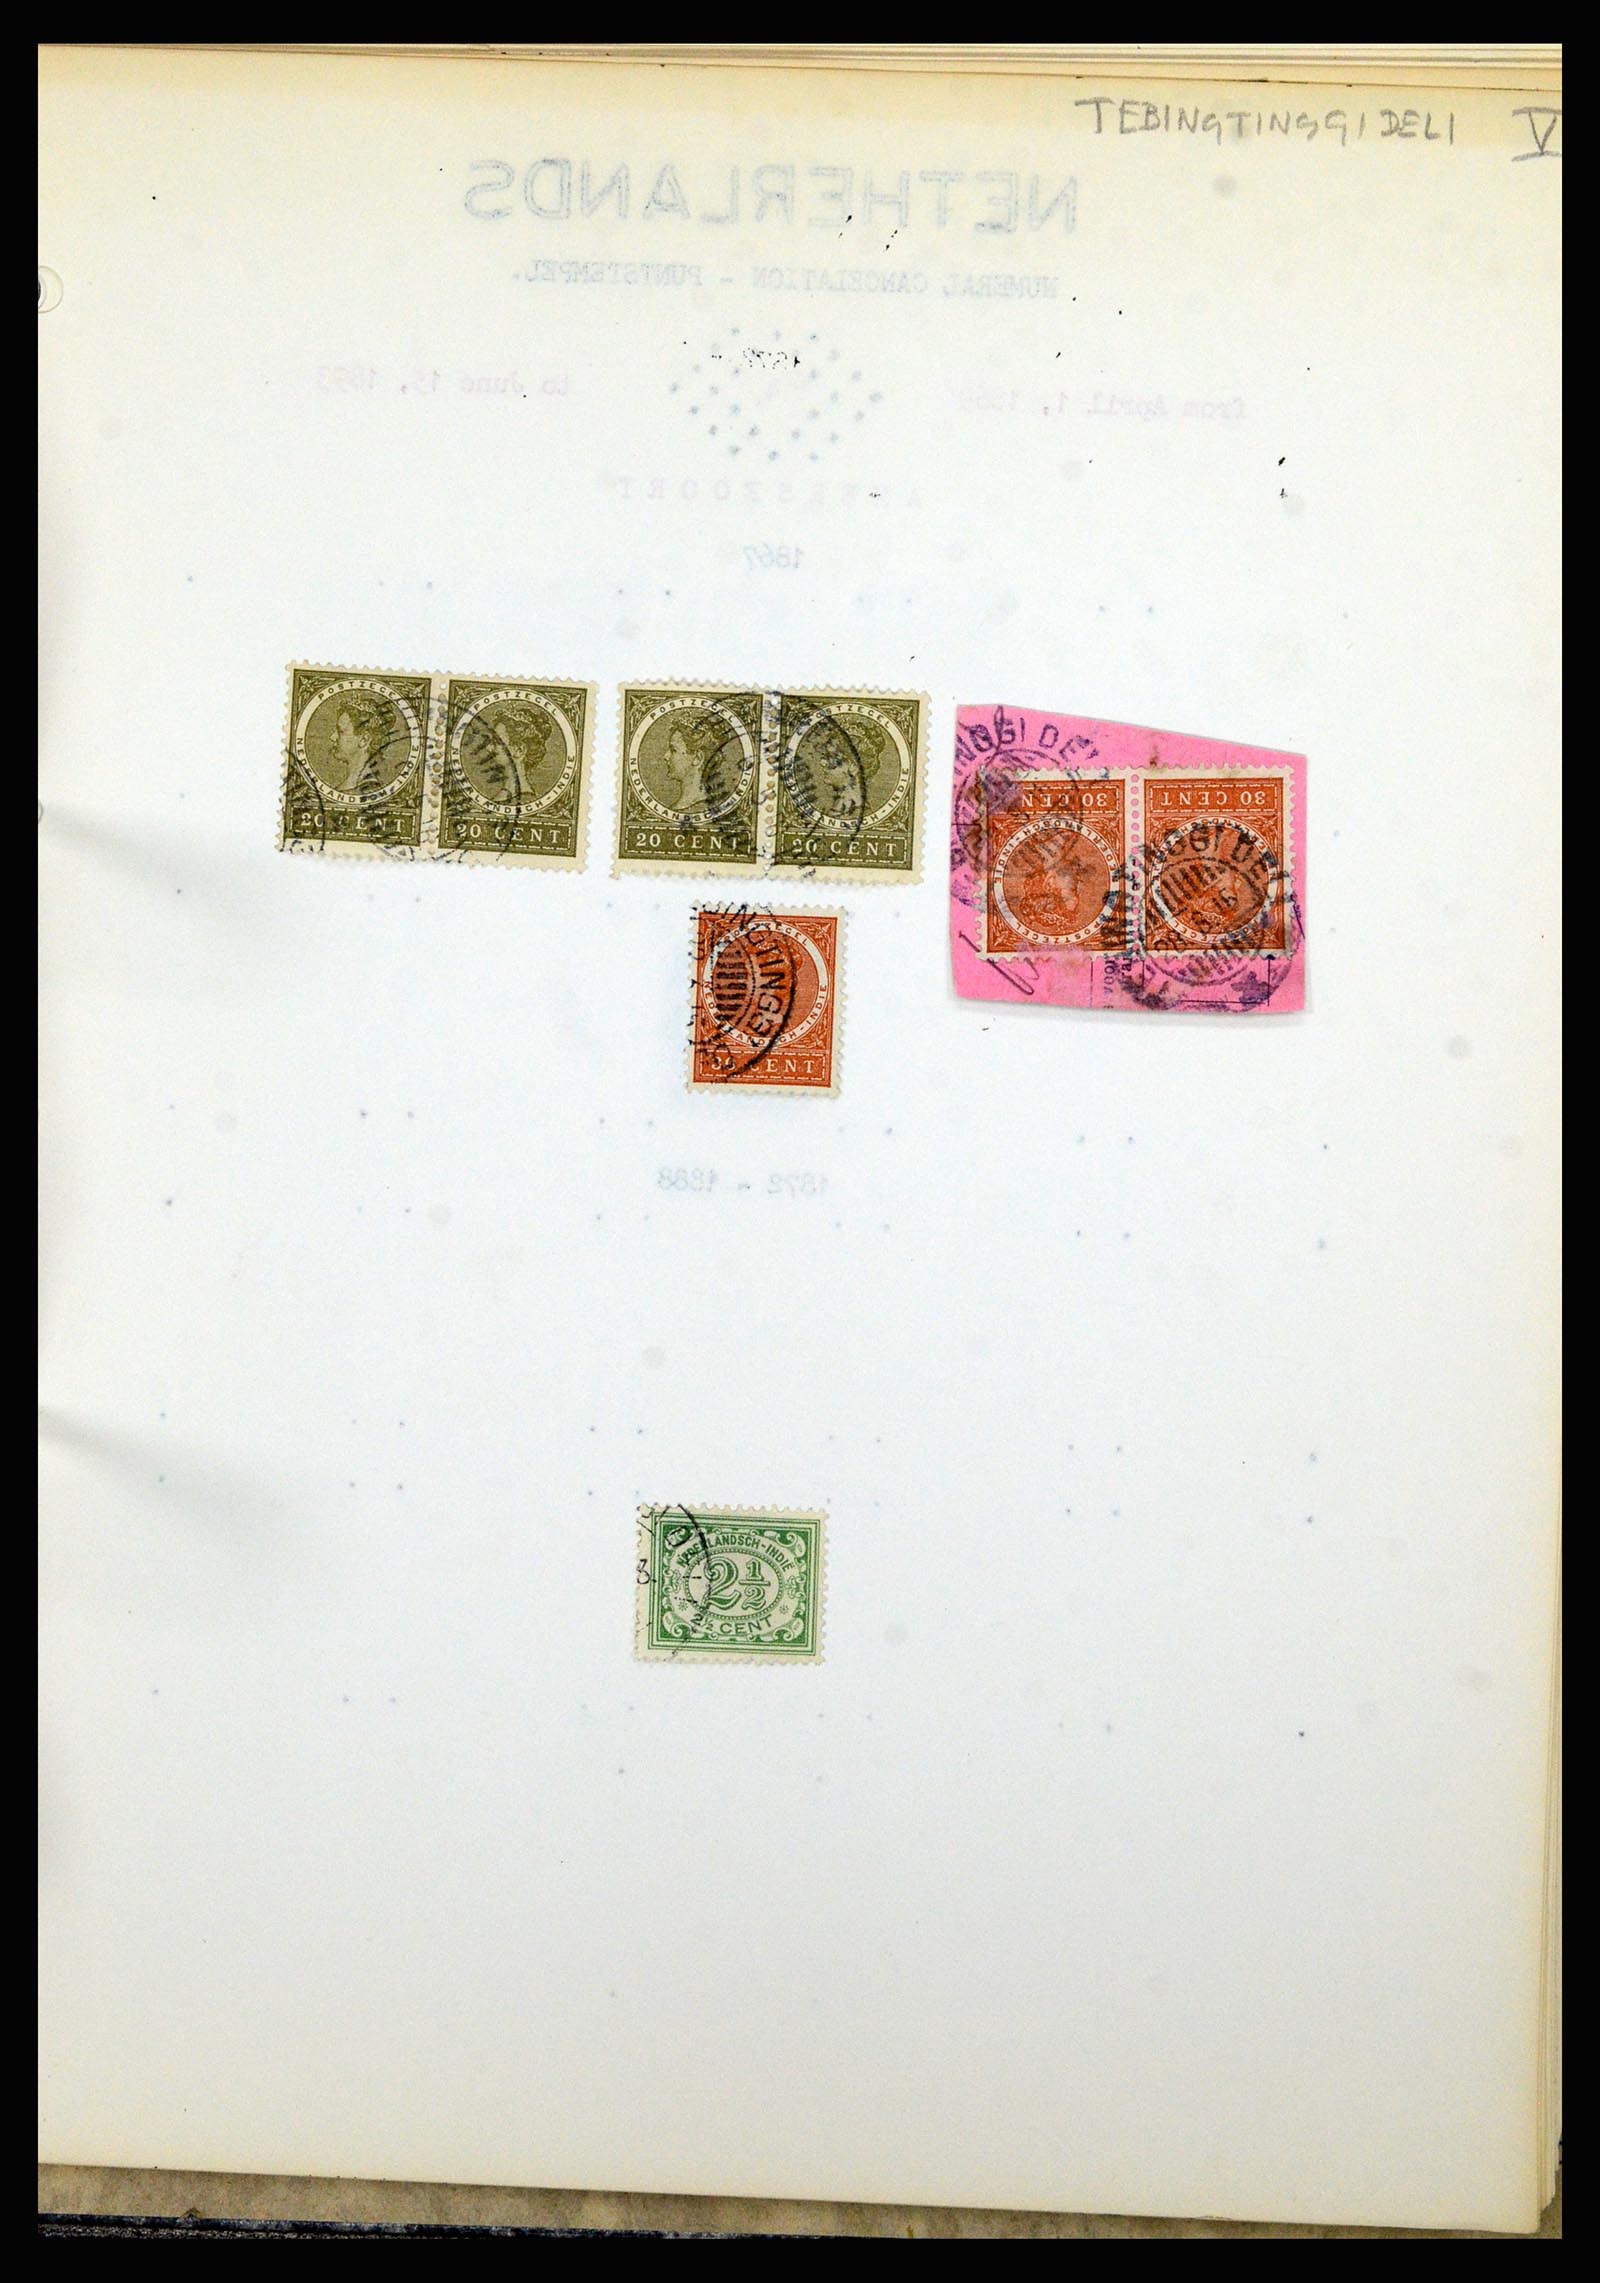 36841 158 - Stamp collection 36841 Dutch east Indies short bar cancels.